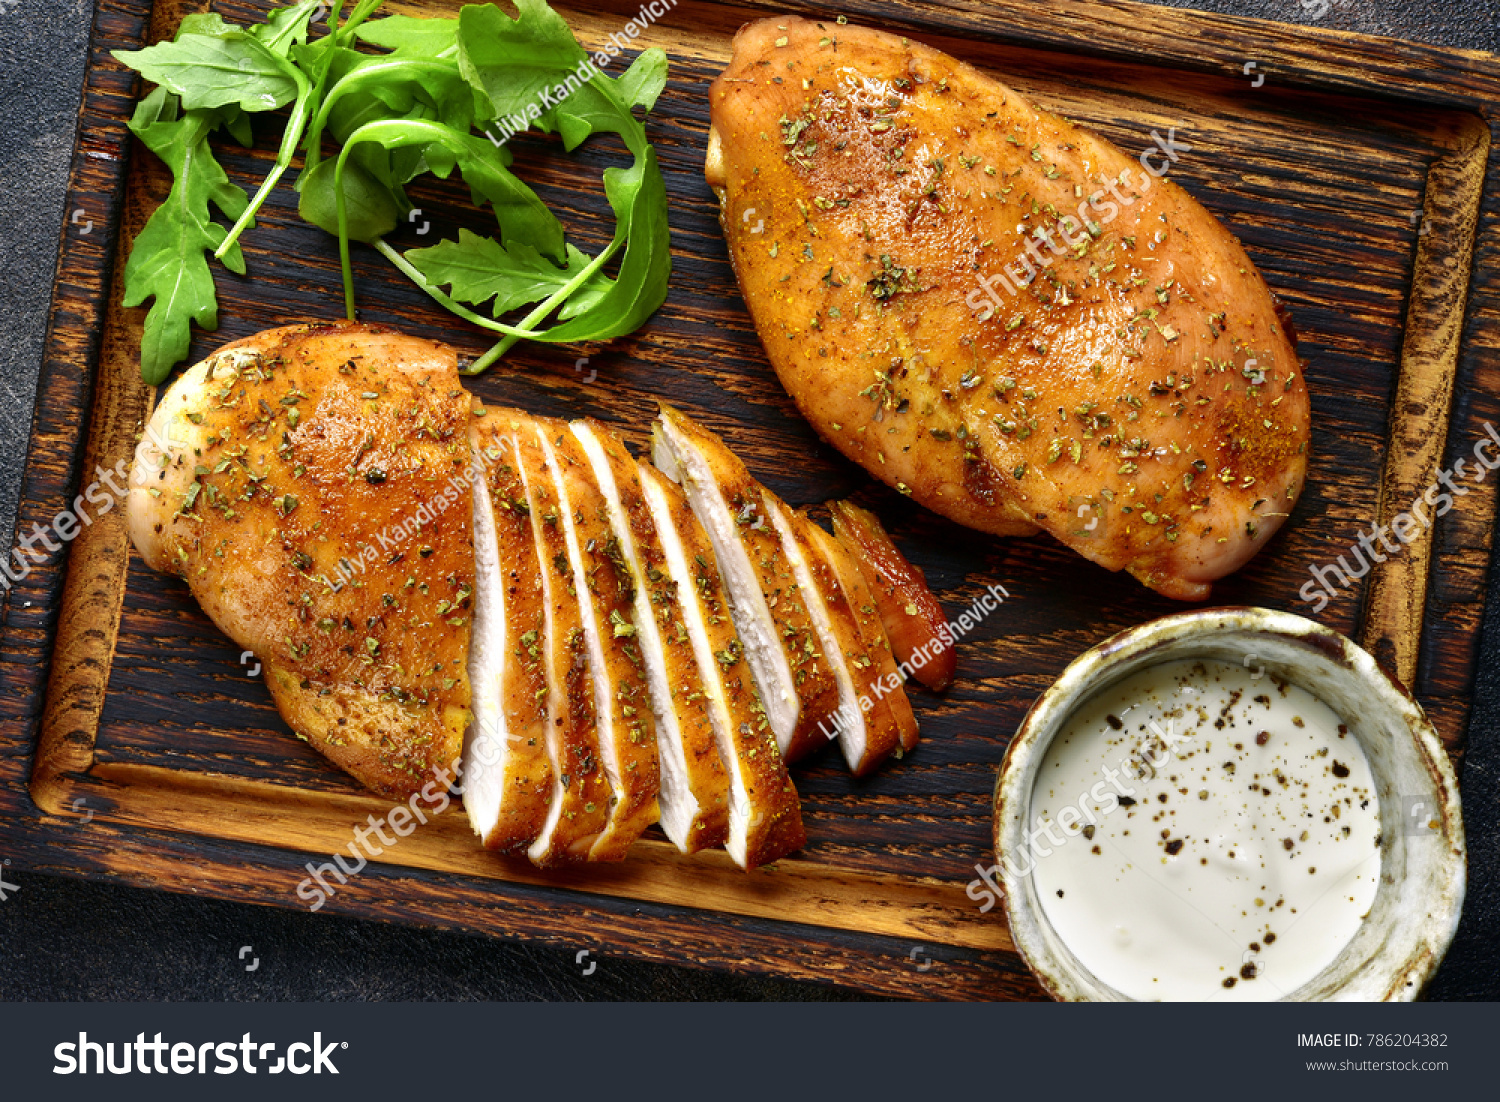 Grilled chicken breast in a sweet and sour marinade with yogurt sauce on a wooden cutting board.Top view. #786204382